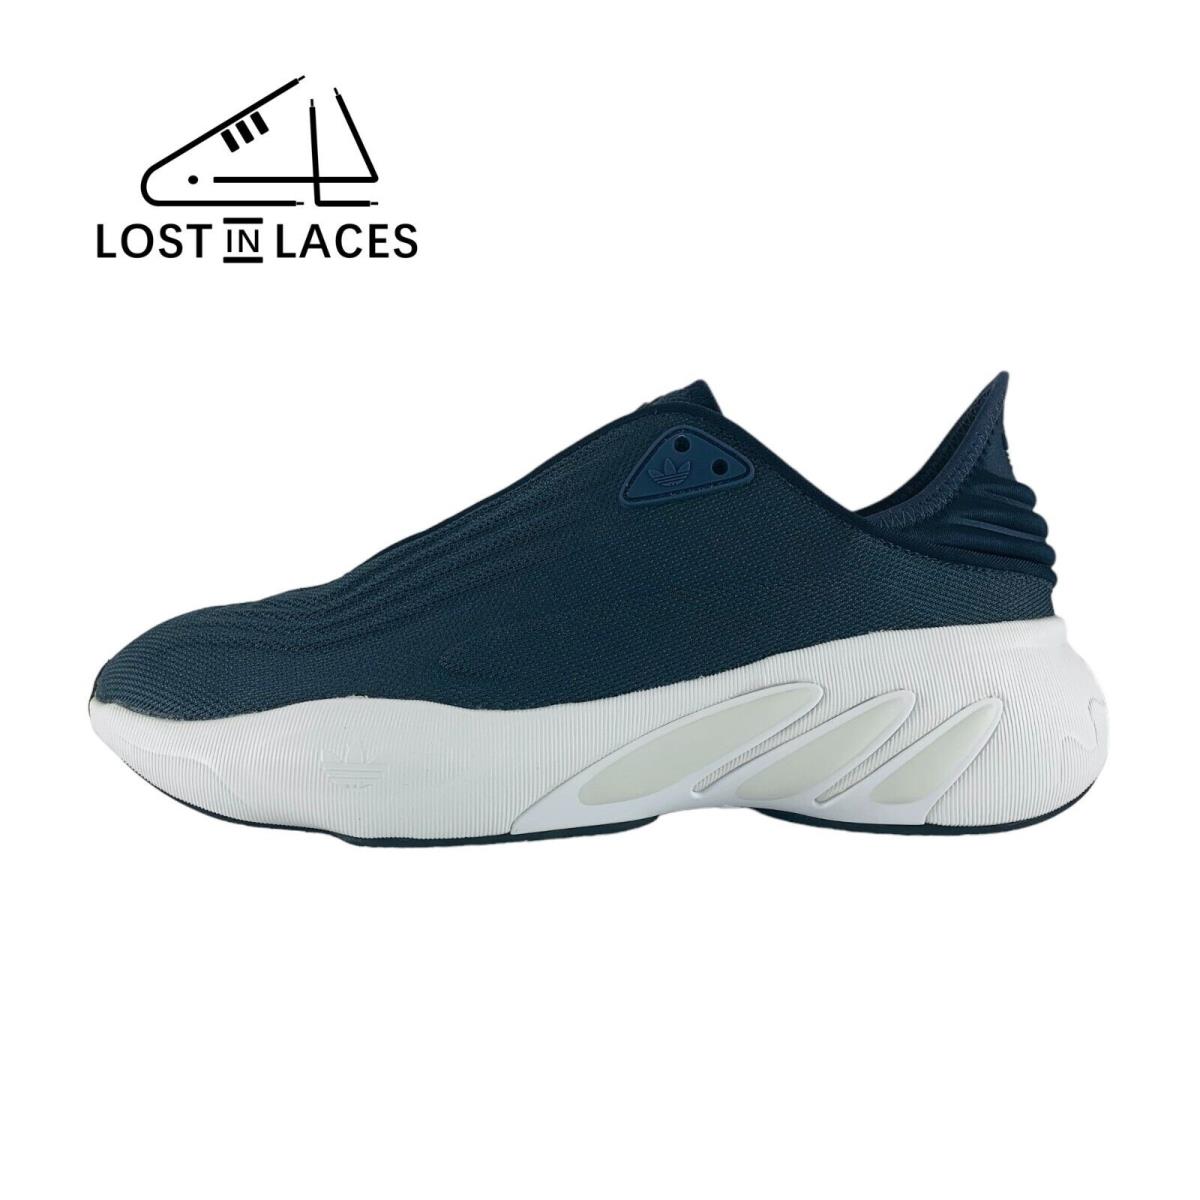 Adidas Adifom Sltn Shadow Navy Blue White Sneakers Shoes Men`s Sizes